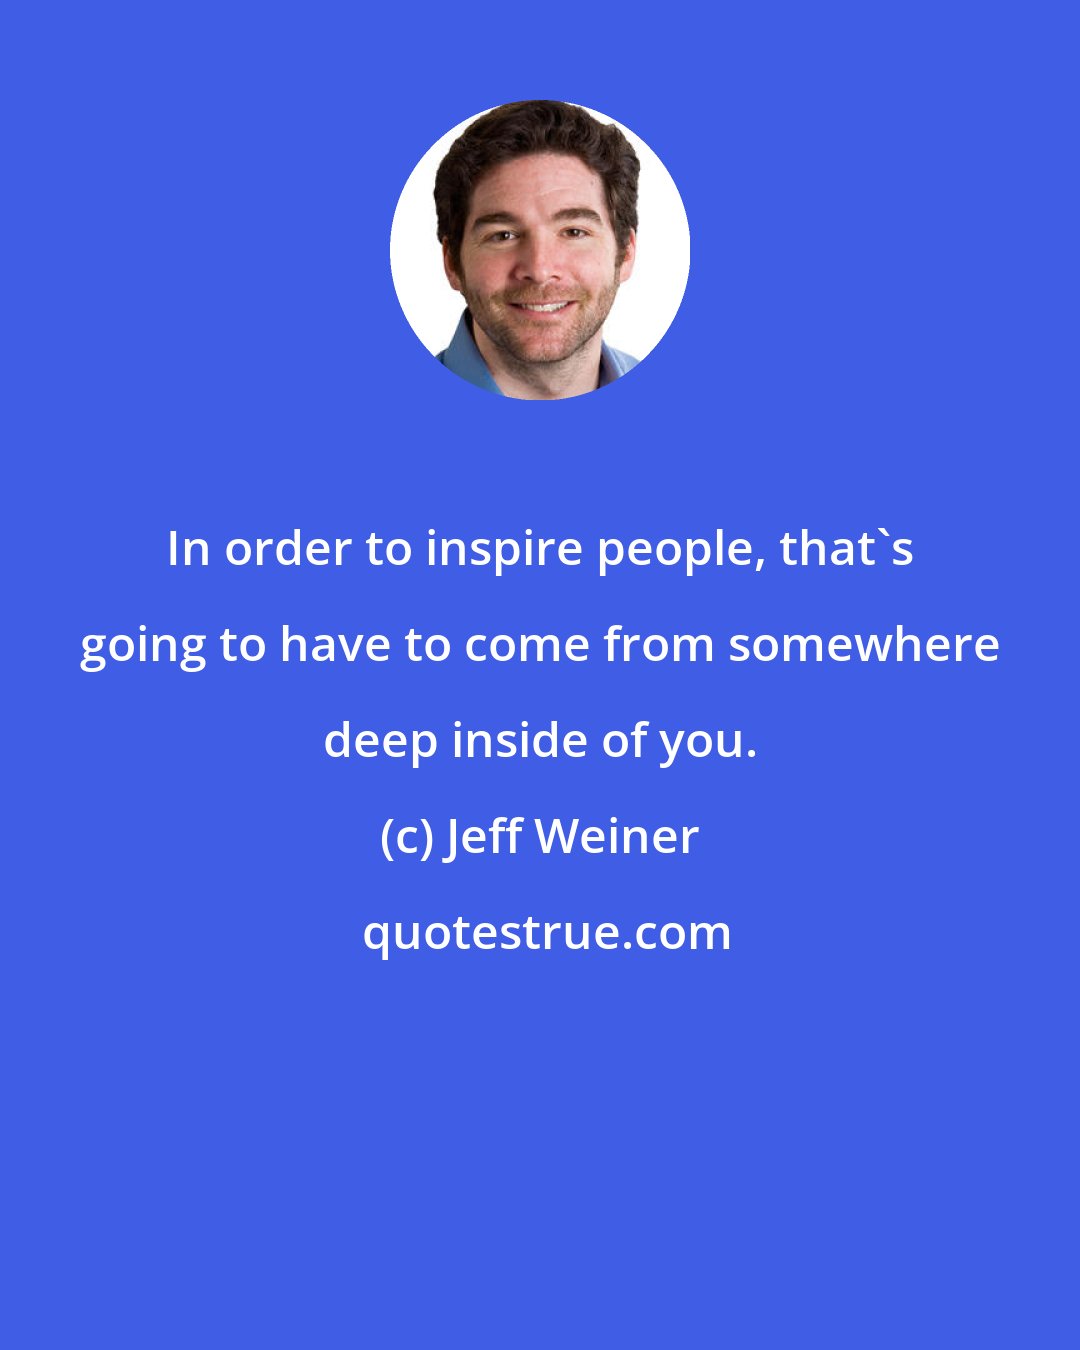 Jeff Weiner: In order to inspire people, that's going to have to come from somewhere deep inside of you.